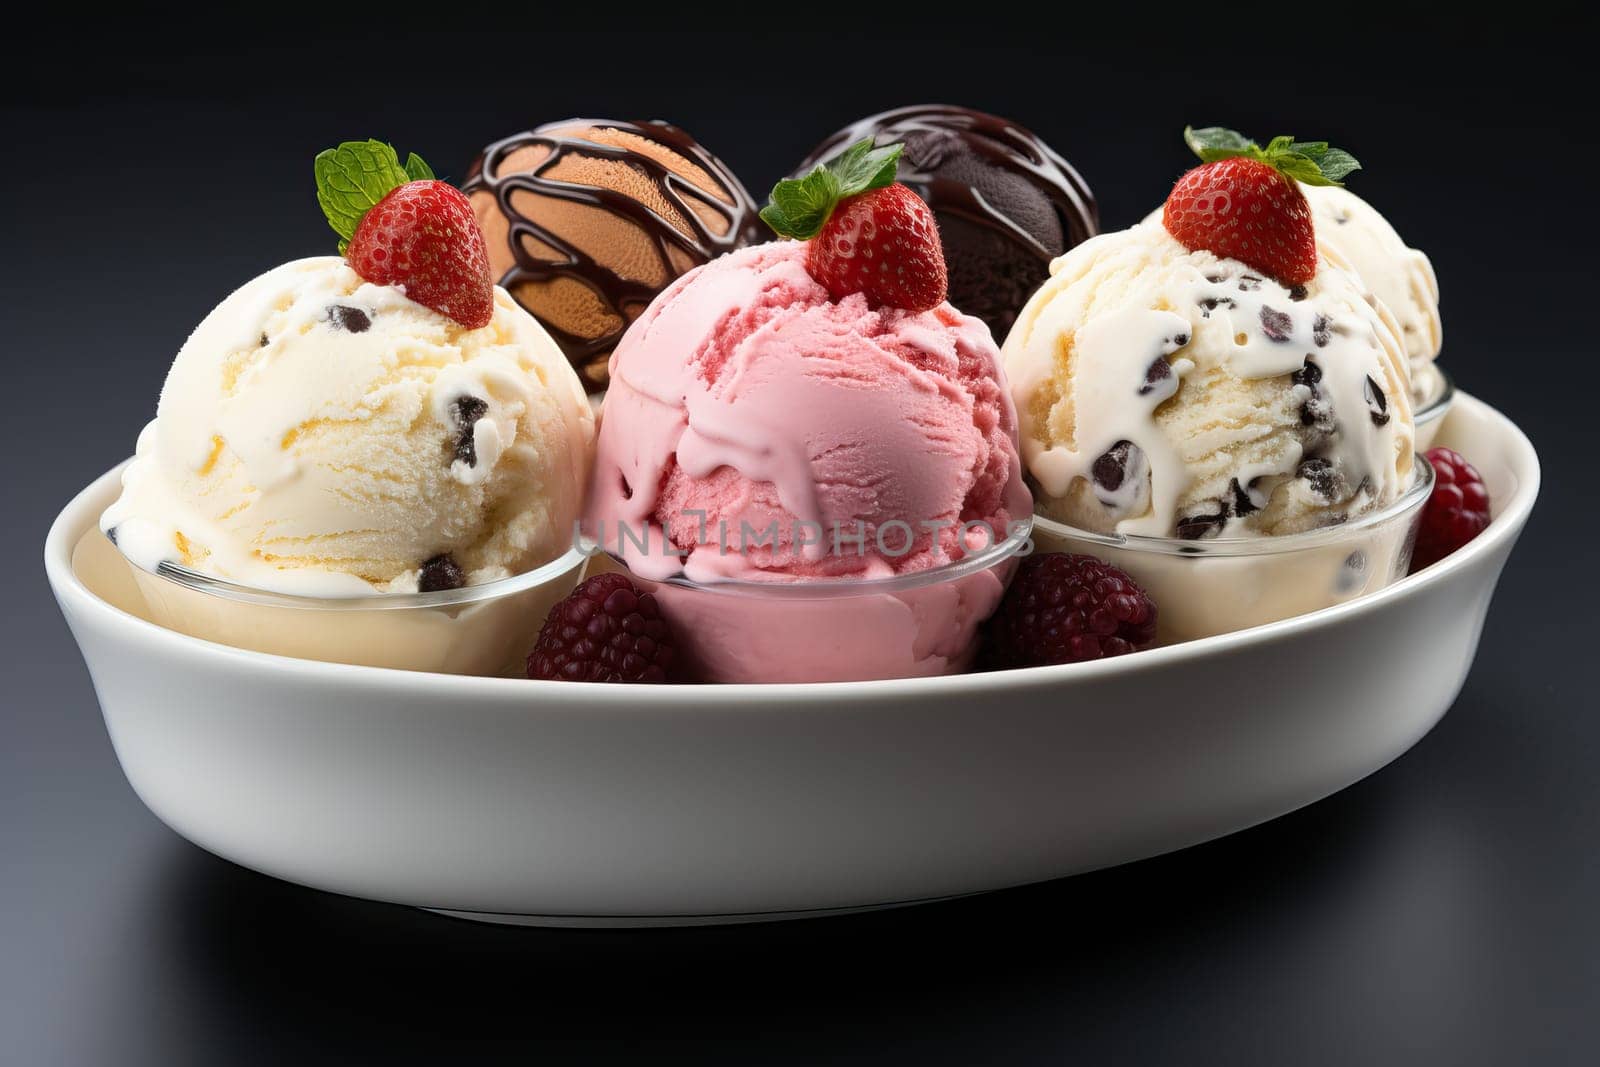 Scoops of vanilla, strawberry and chocolate ice cream in an ice cream bowl or ice cream in an ice cream bowl, colored ice cream scoops.